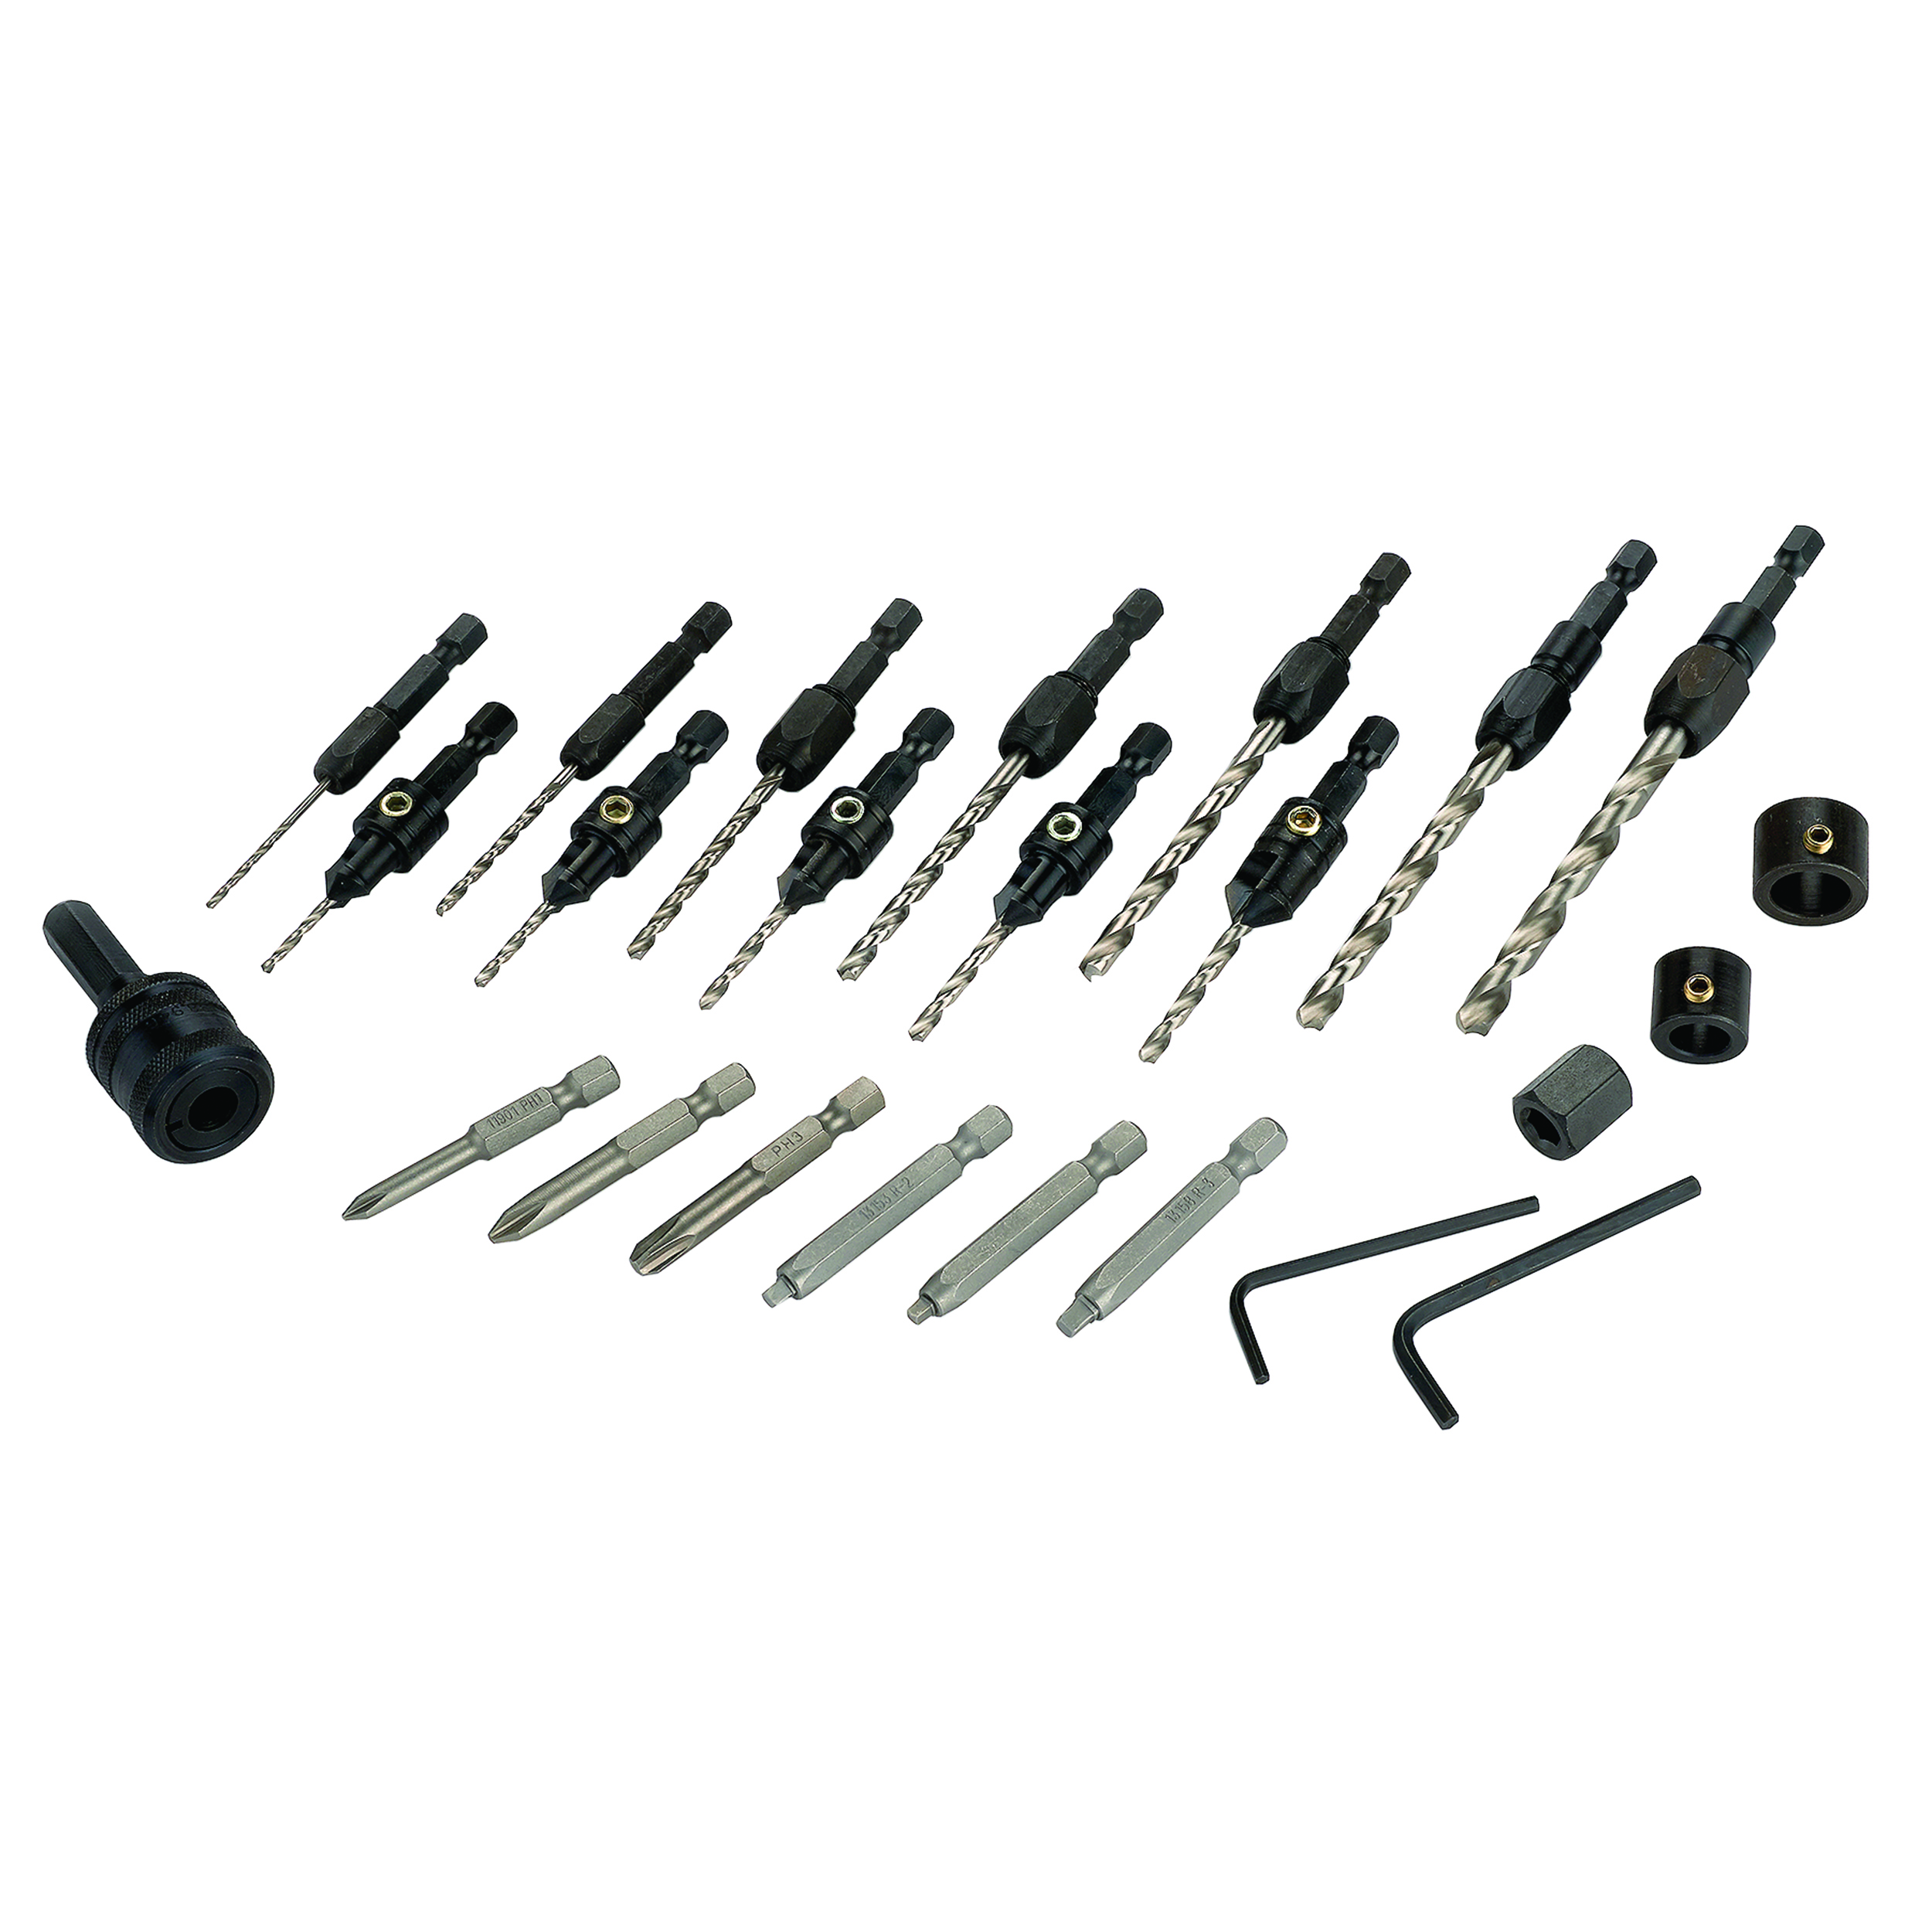 25pc Countersink Drill And Driver Bit Set